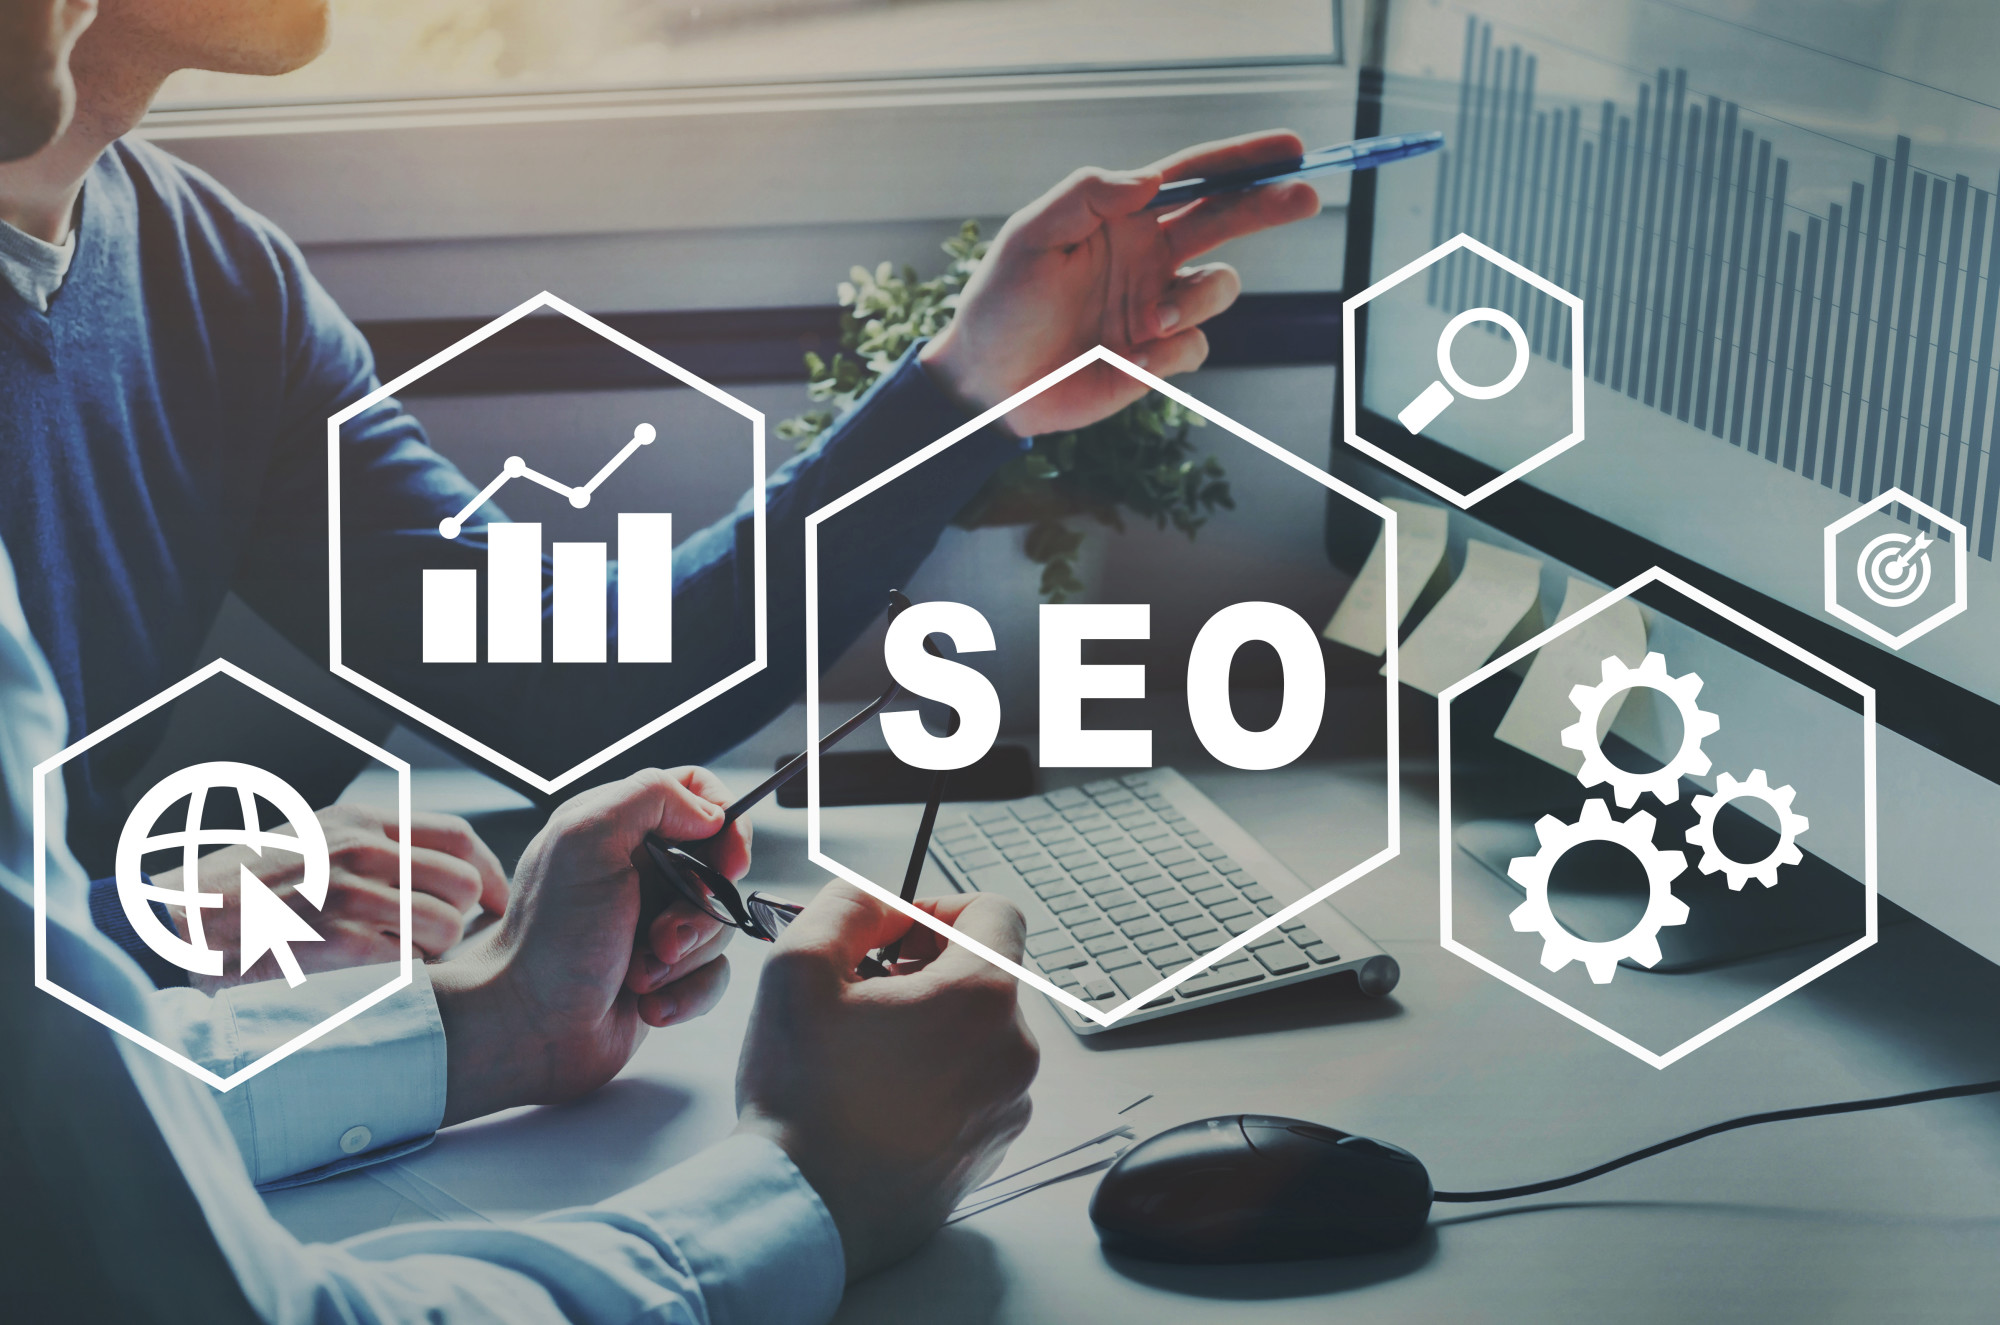 Using SEO for Growth: The 5 Biggest SEO Trends You Need to Follow ...